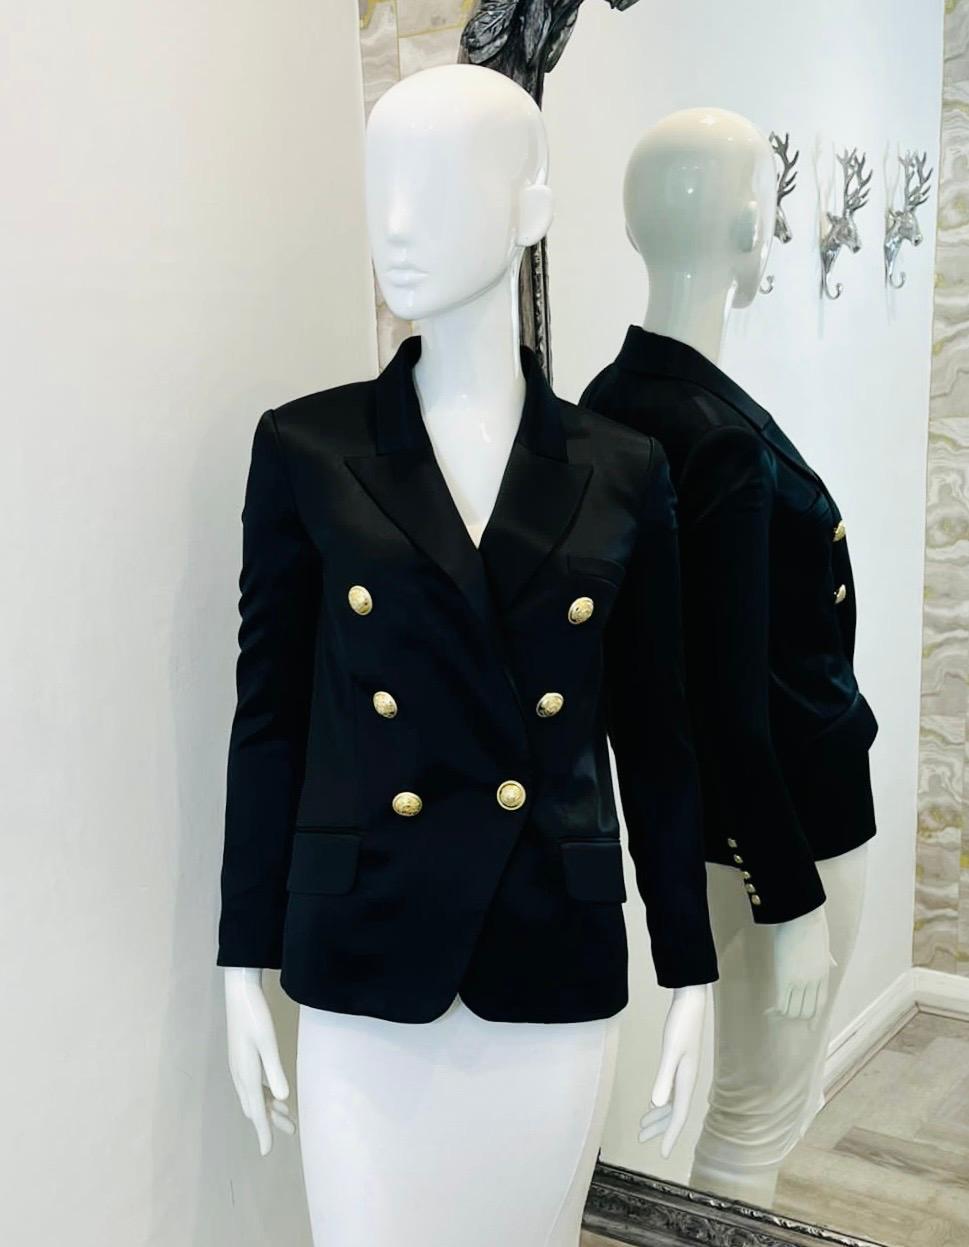 Balmain Tailored Silk Jacket

Black, double-breasted blazer designed with logo embroidered gold buttons.

Featuring notched lapels, flap pockets to the front and buttoned cuffs. Rrp £1850

Size –  34FR

Condition – Very Good (Minor pulls to the